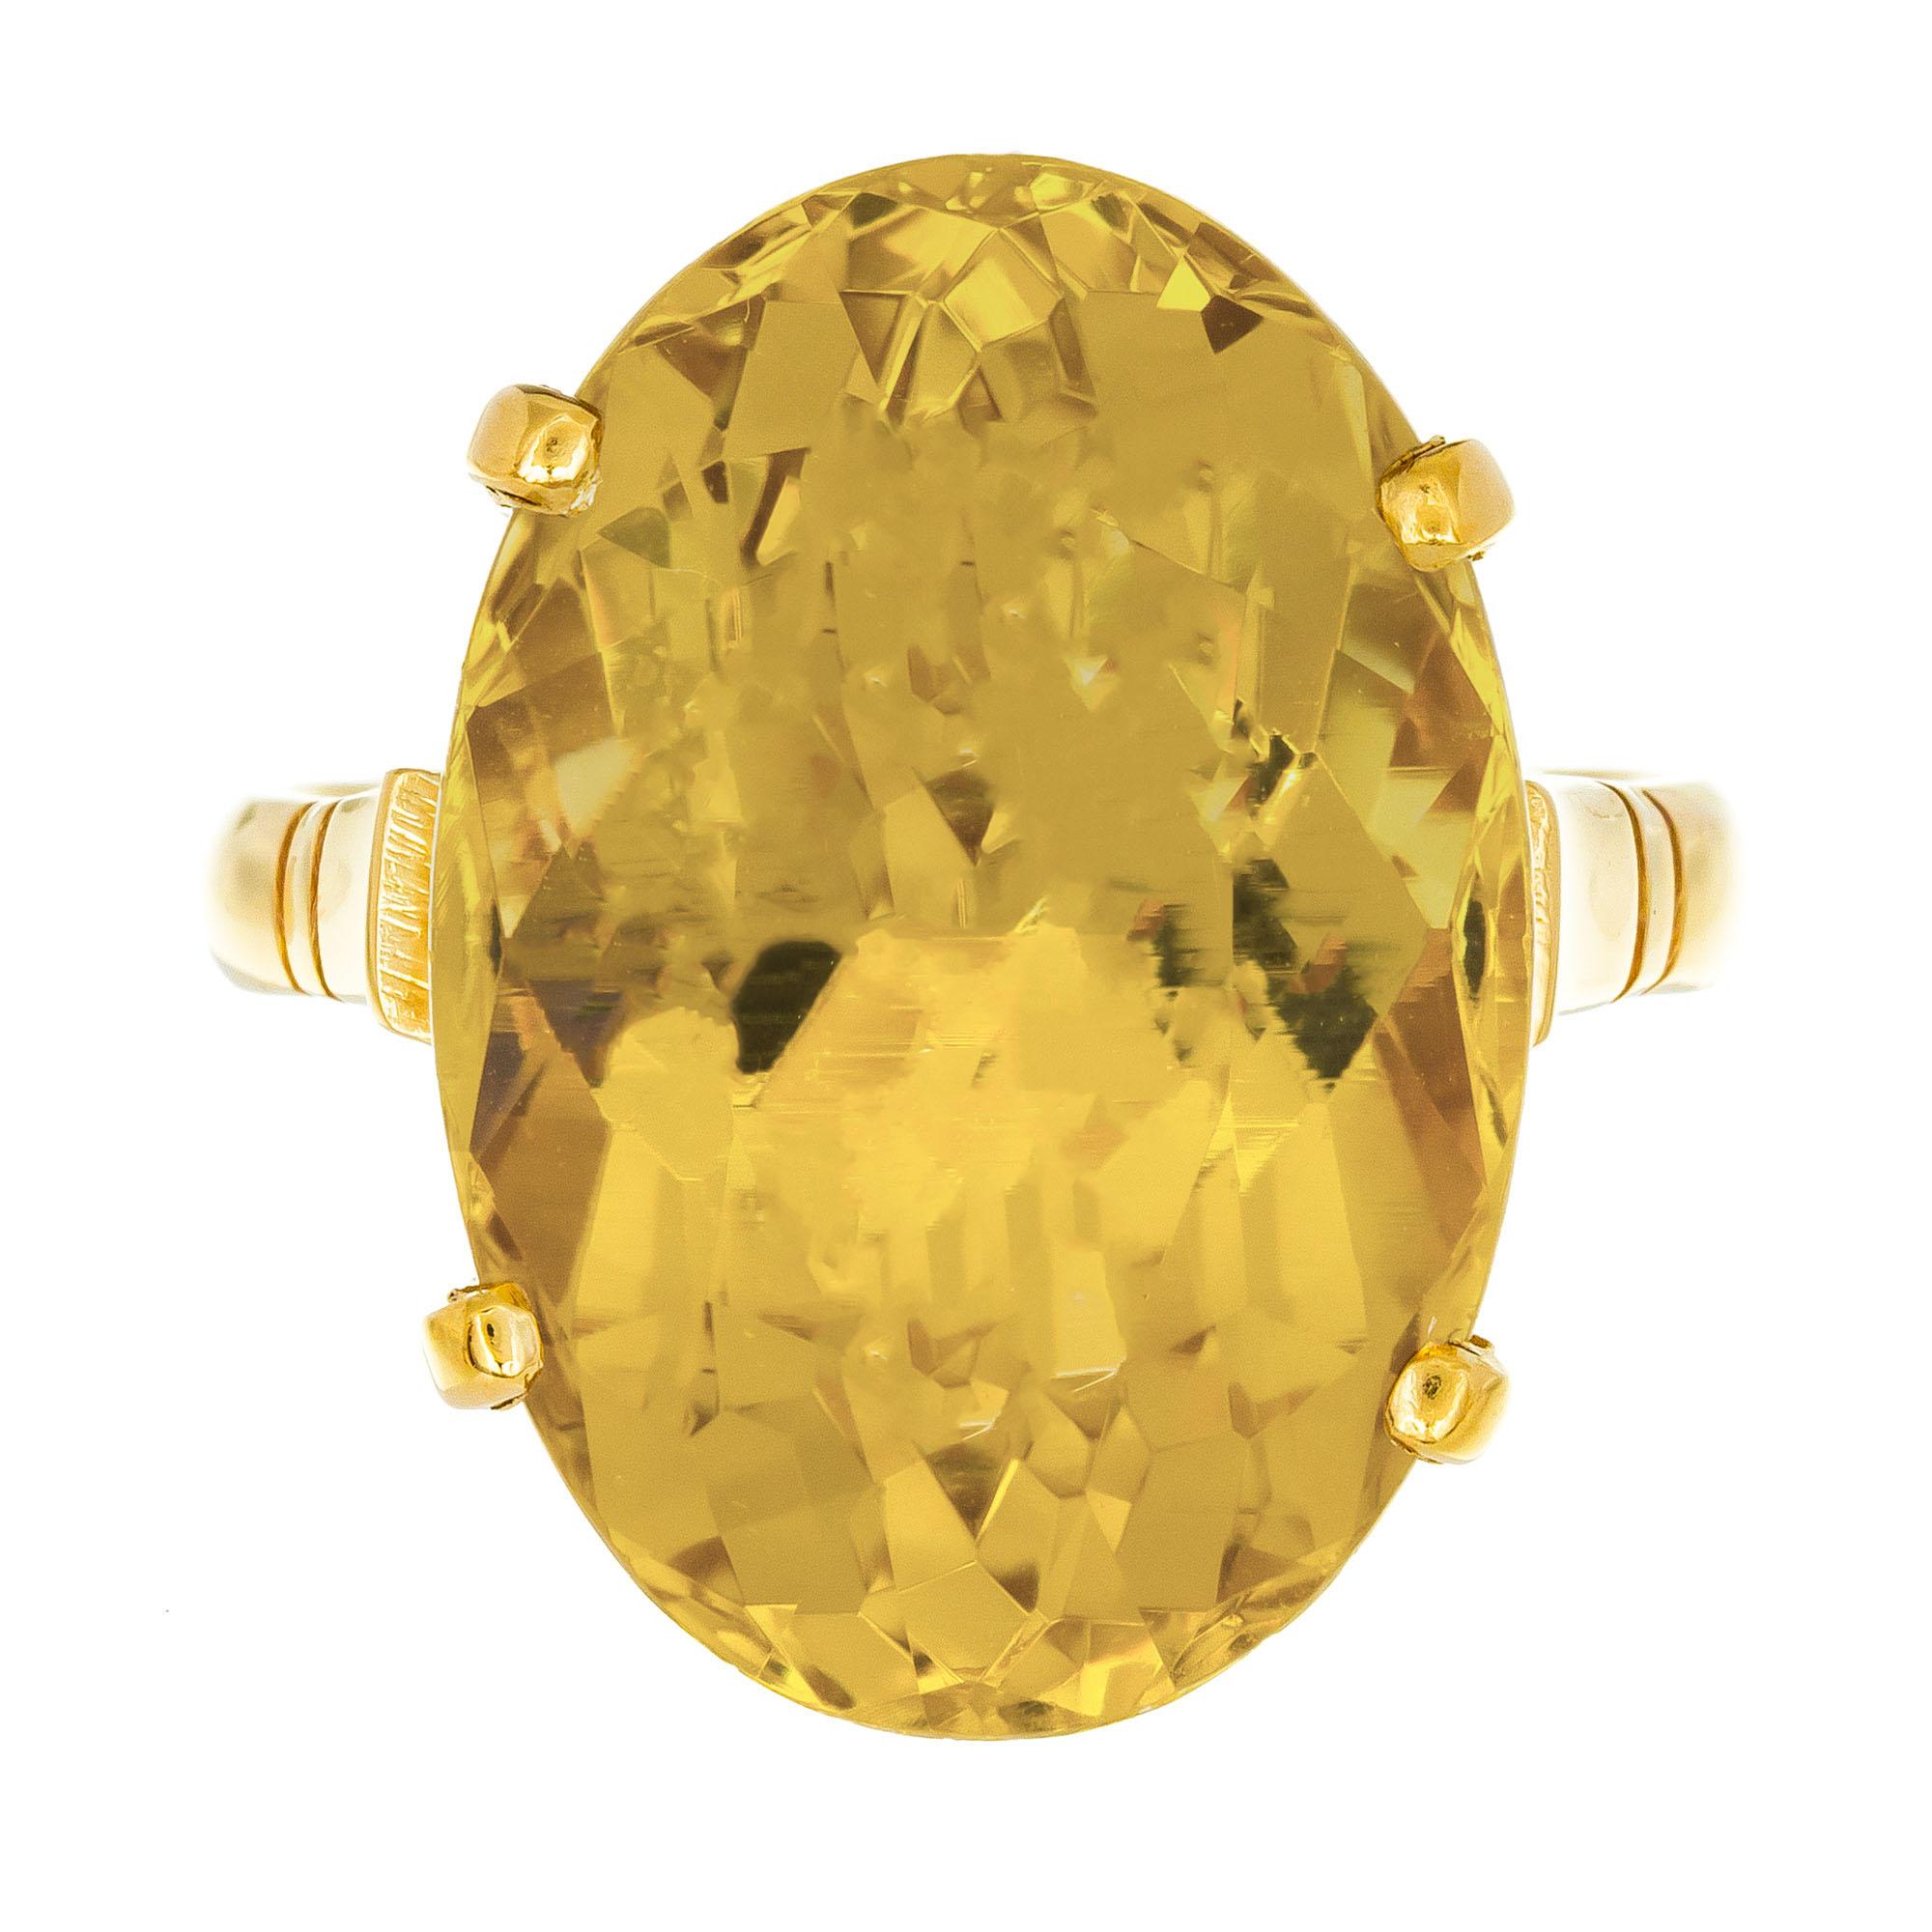 1960's Oval natural golden citrine ring in 18k yellow gold cocktail setting. 

1 oval golden yellow citrine, VS approx. 11.25cts
Size 6.5
18k yellow gold
Stamped: 750
6.9 grams
Width at top: 18.3mm
Height at top: 9.9mm
Width at bottom: 2.5mm
